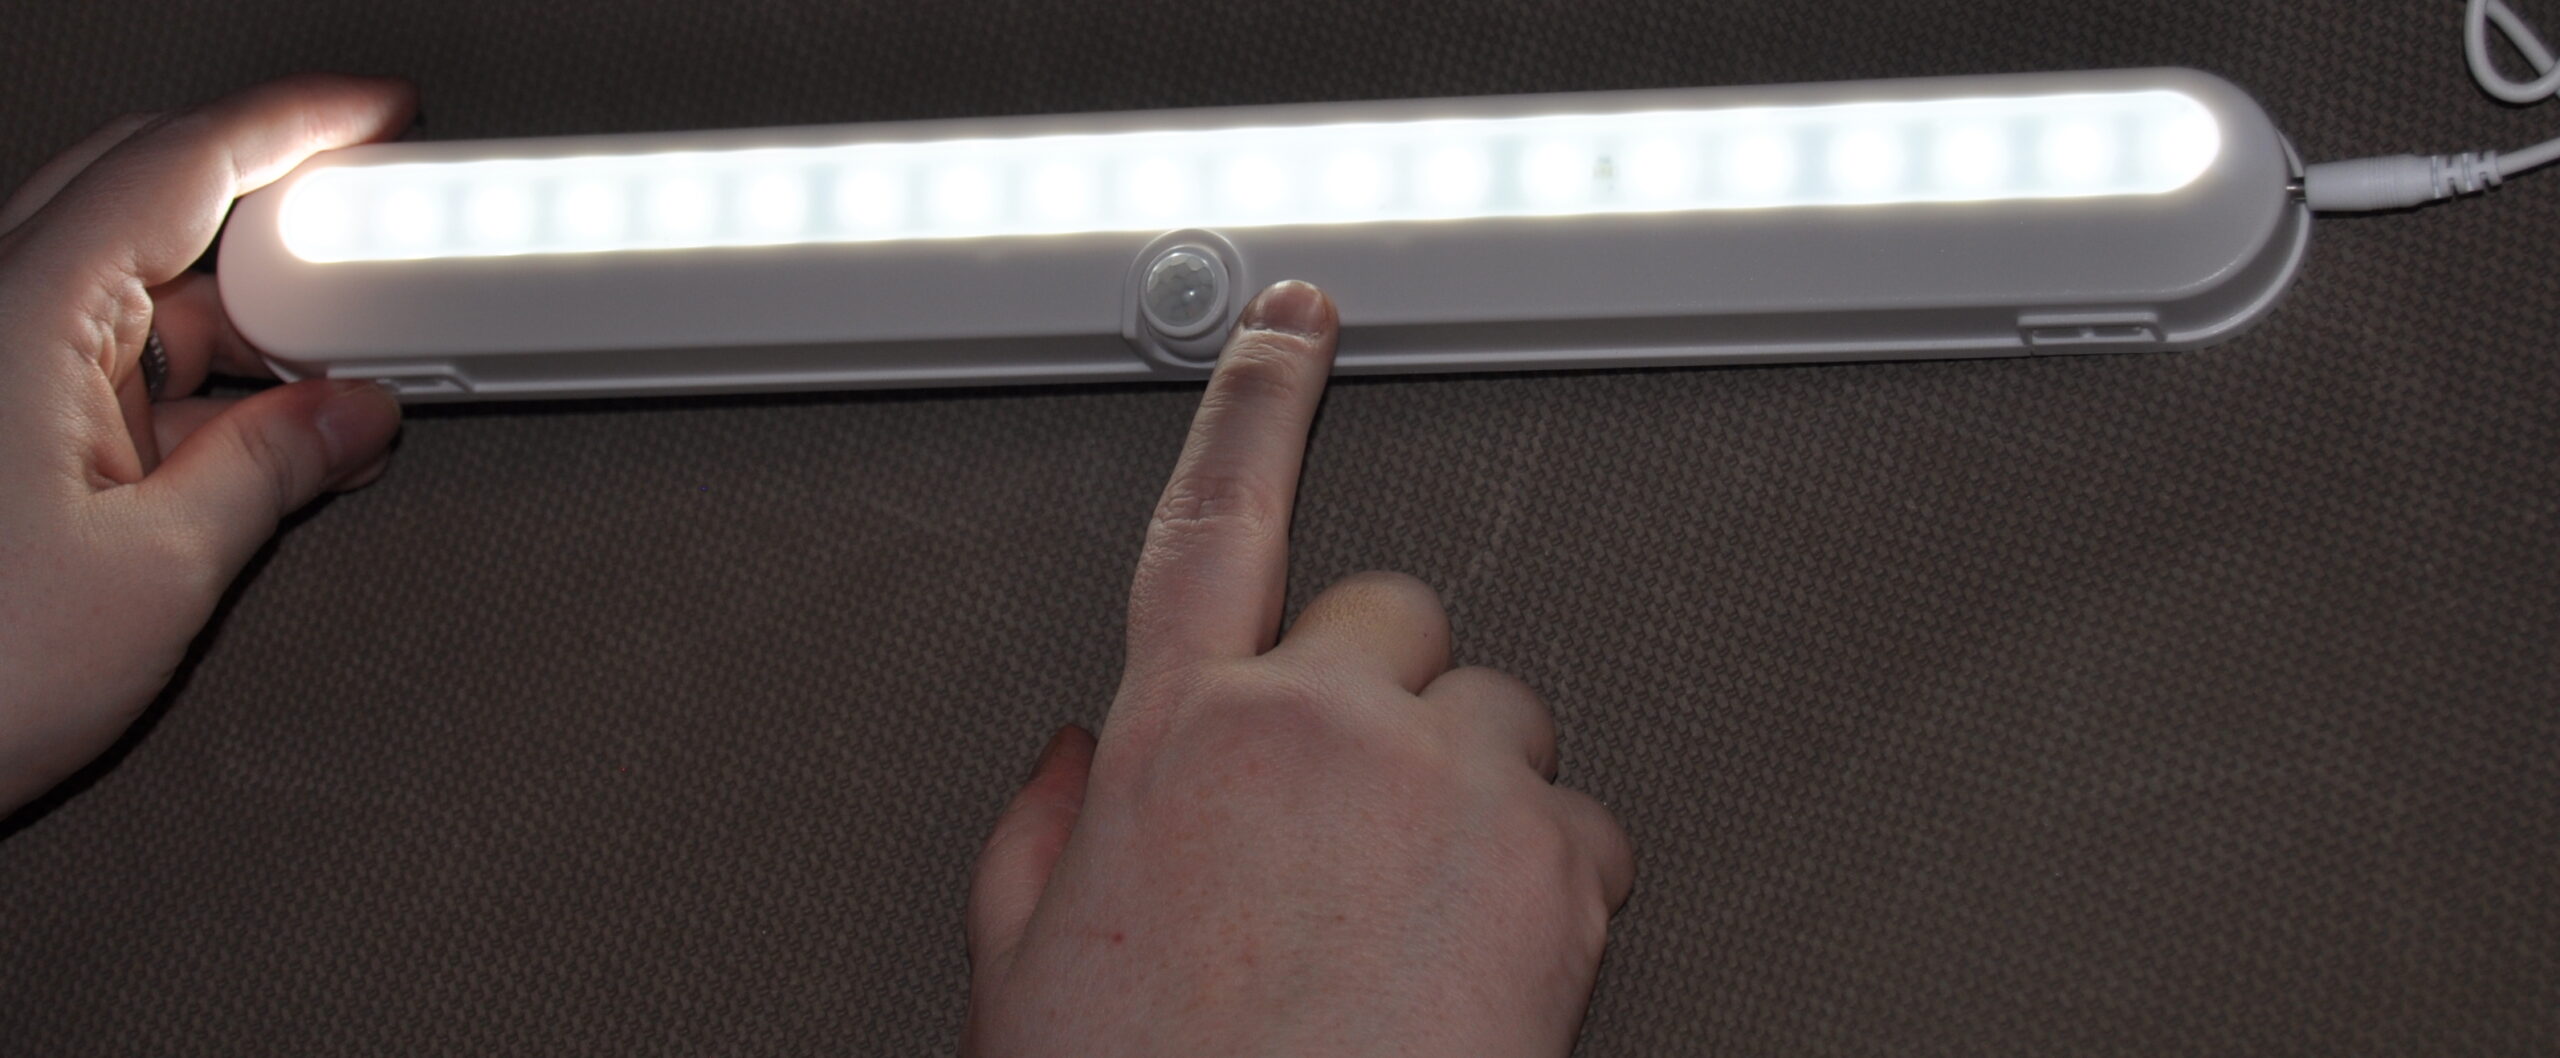 A person's finger next to the on/off button on the best under-cabinet lighting option.